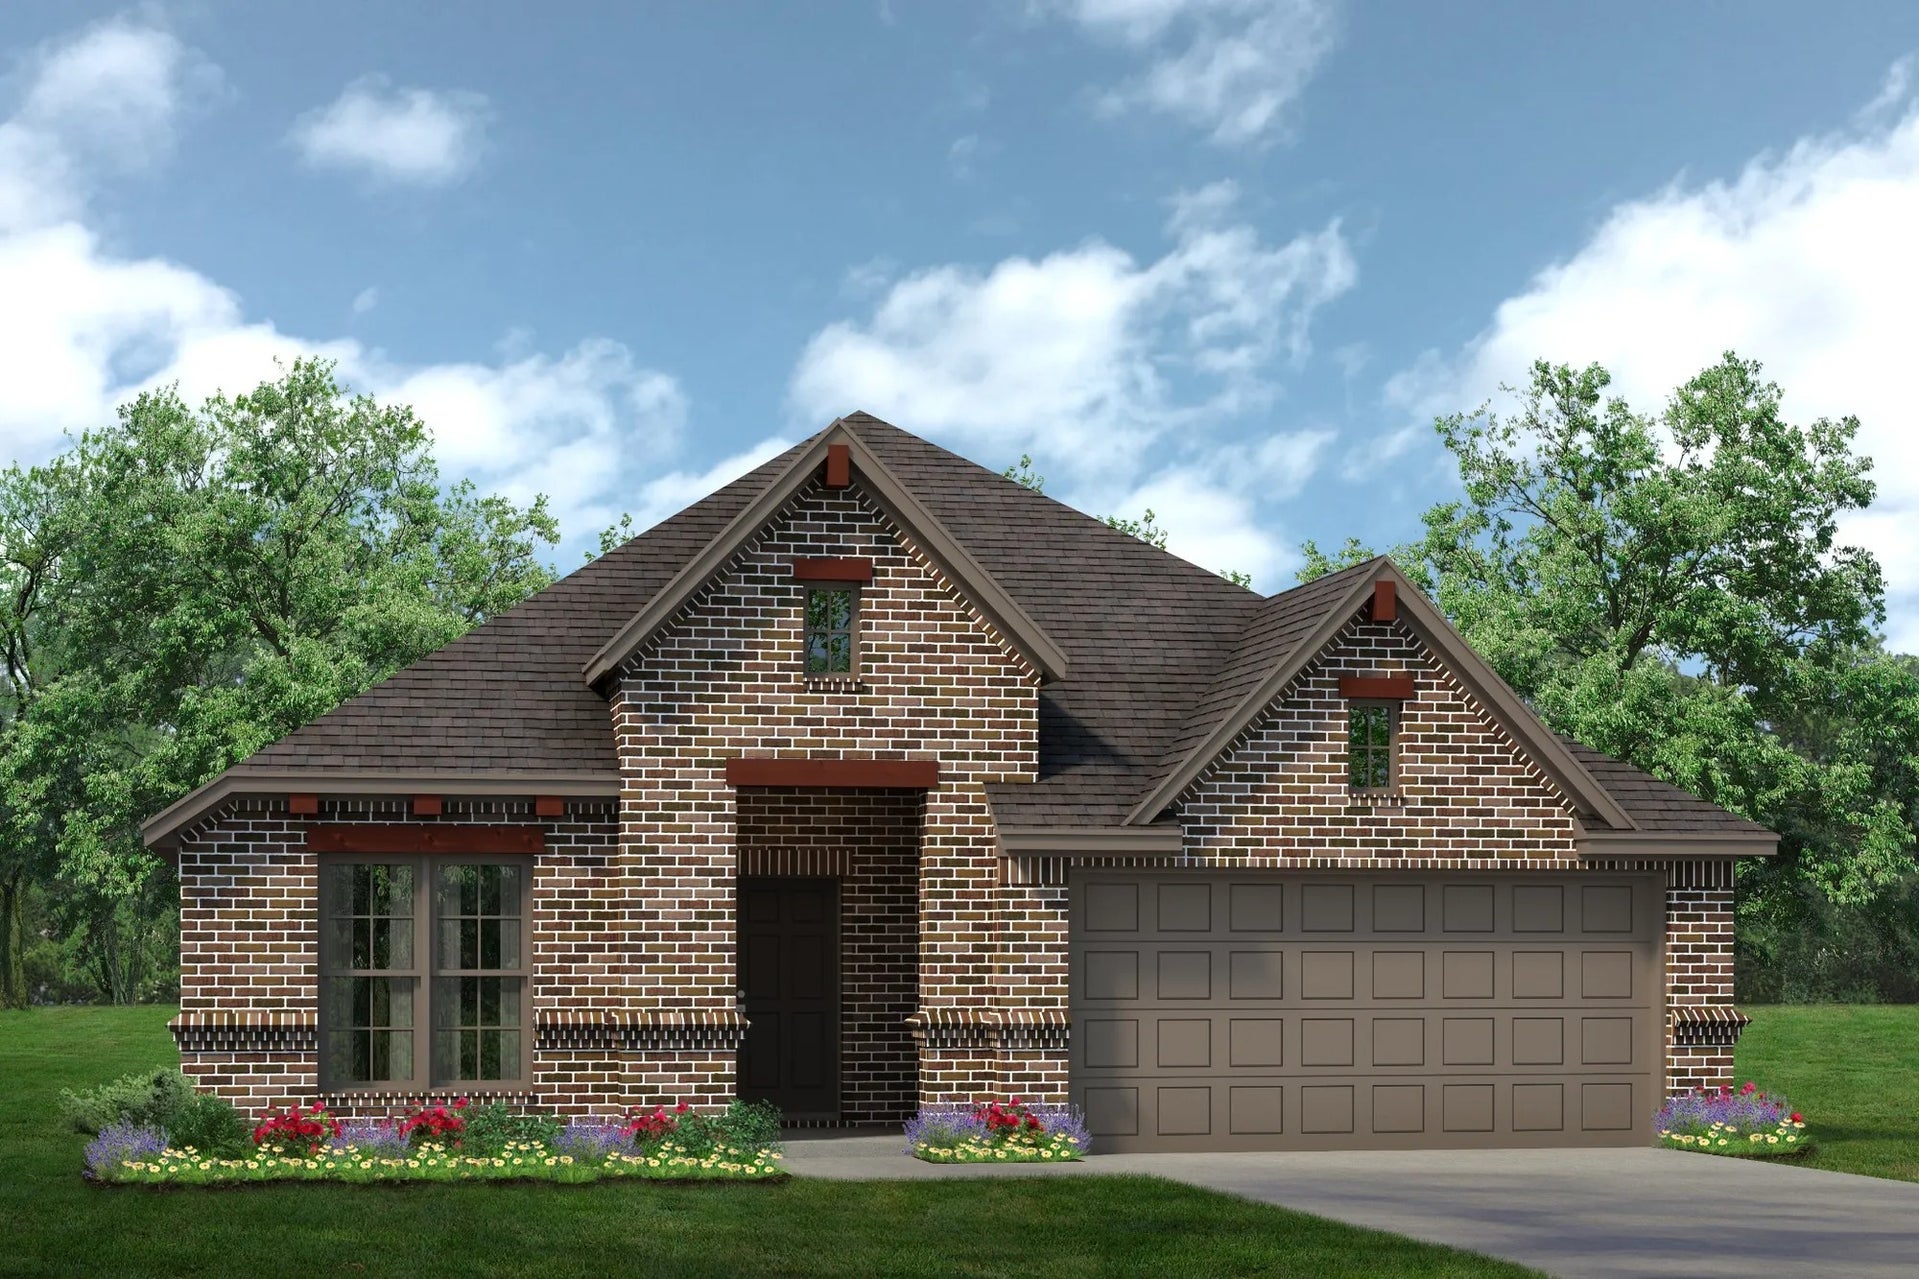 2186 C. 4br New Home in Cleburne, TX